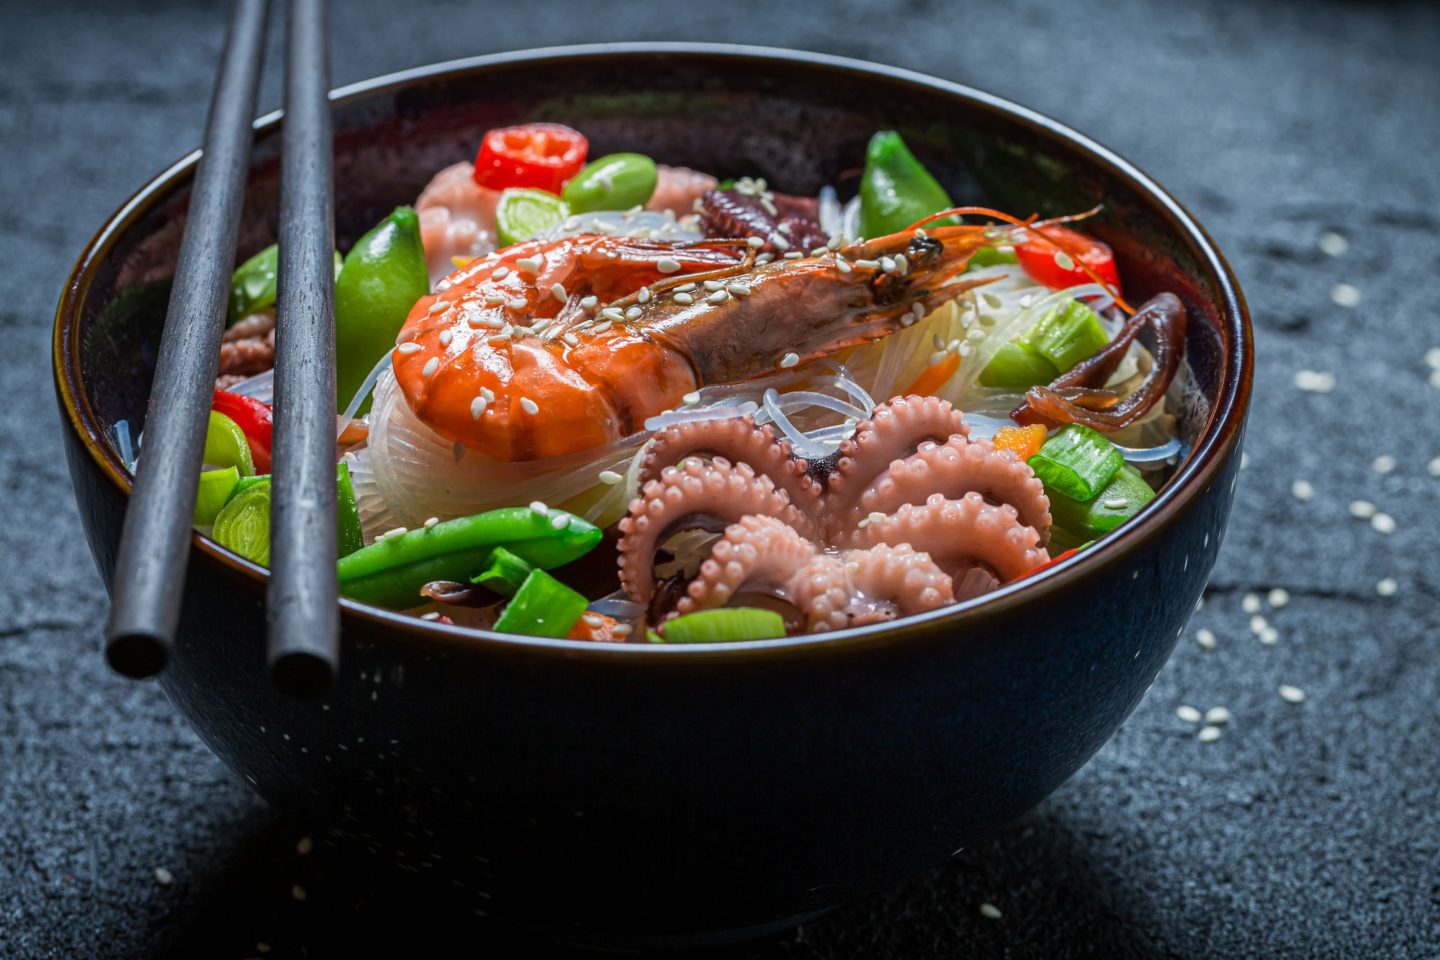 Tasty seafood noodle with prawn and octopus. Classic seafood noodle.